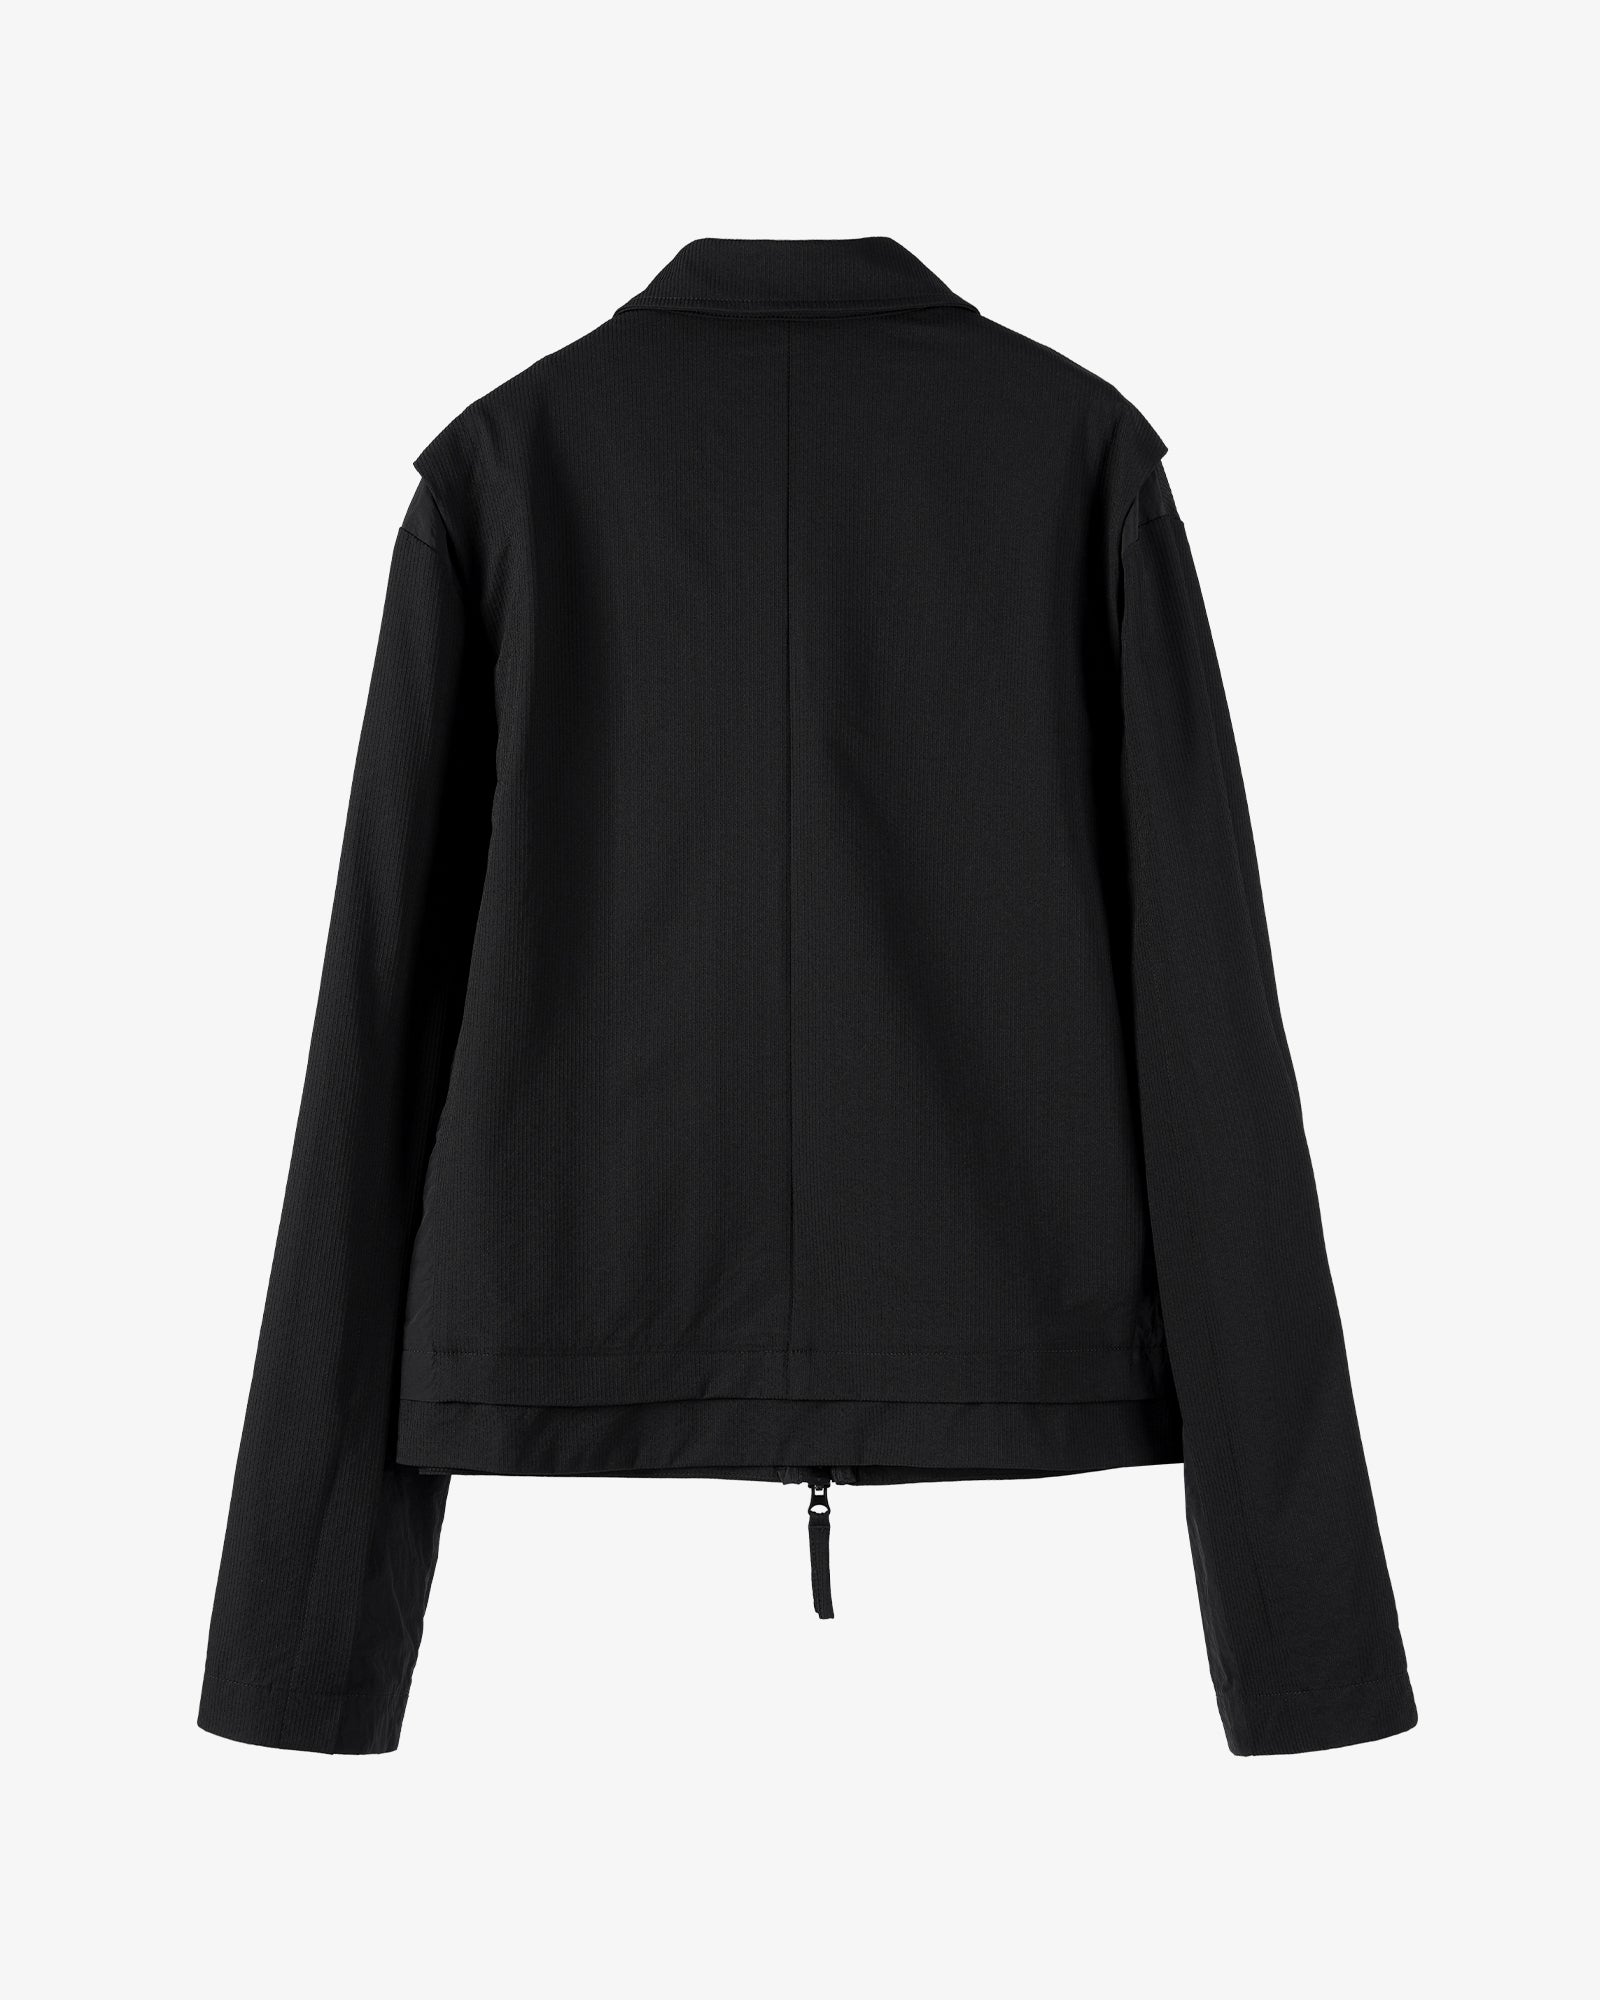 Cropped Collared Zipper Jacket